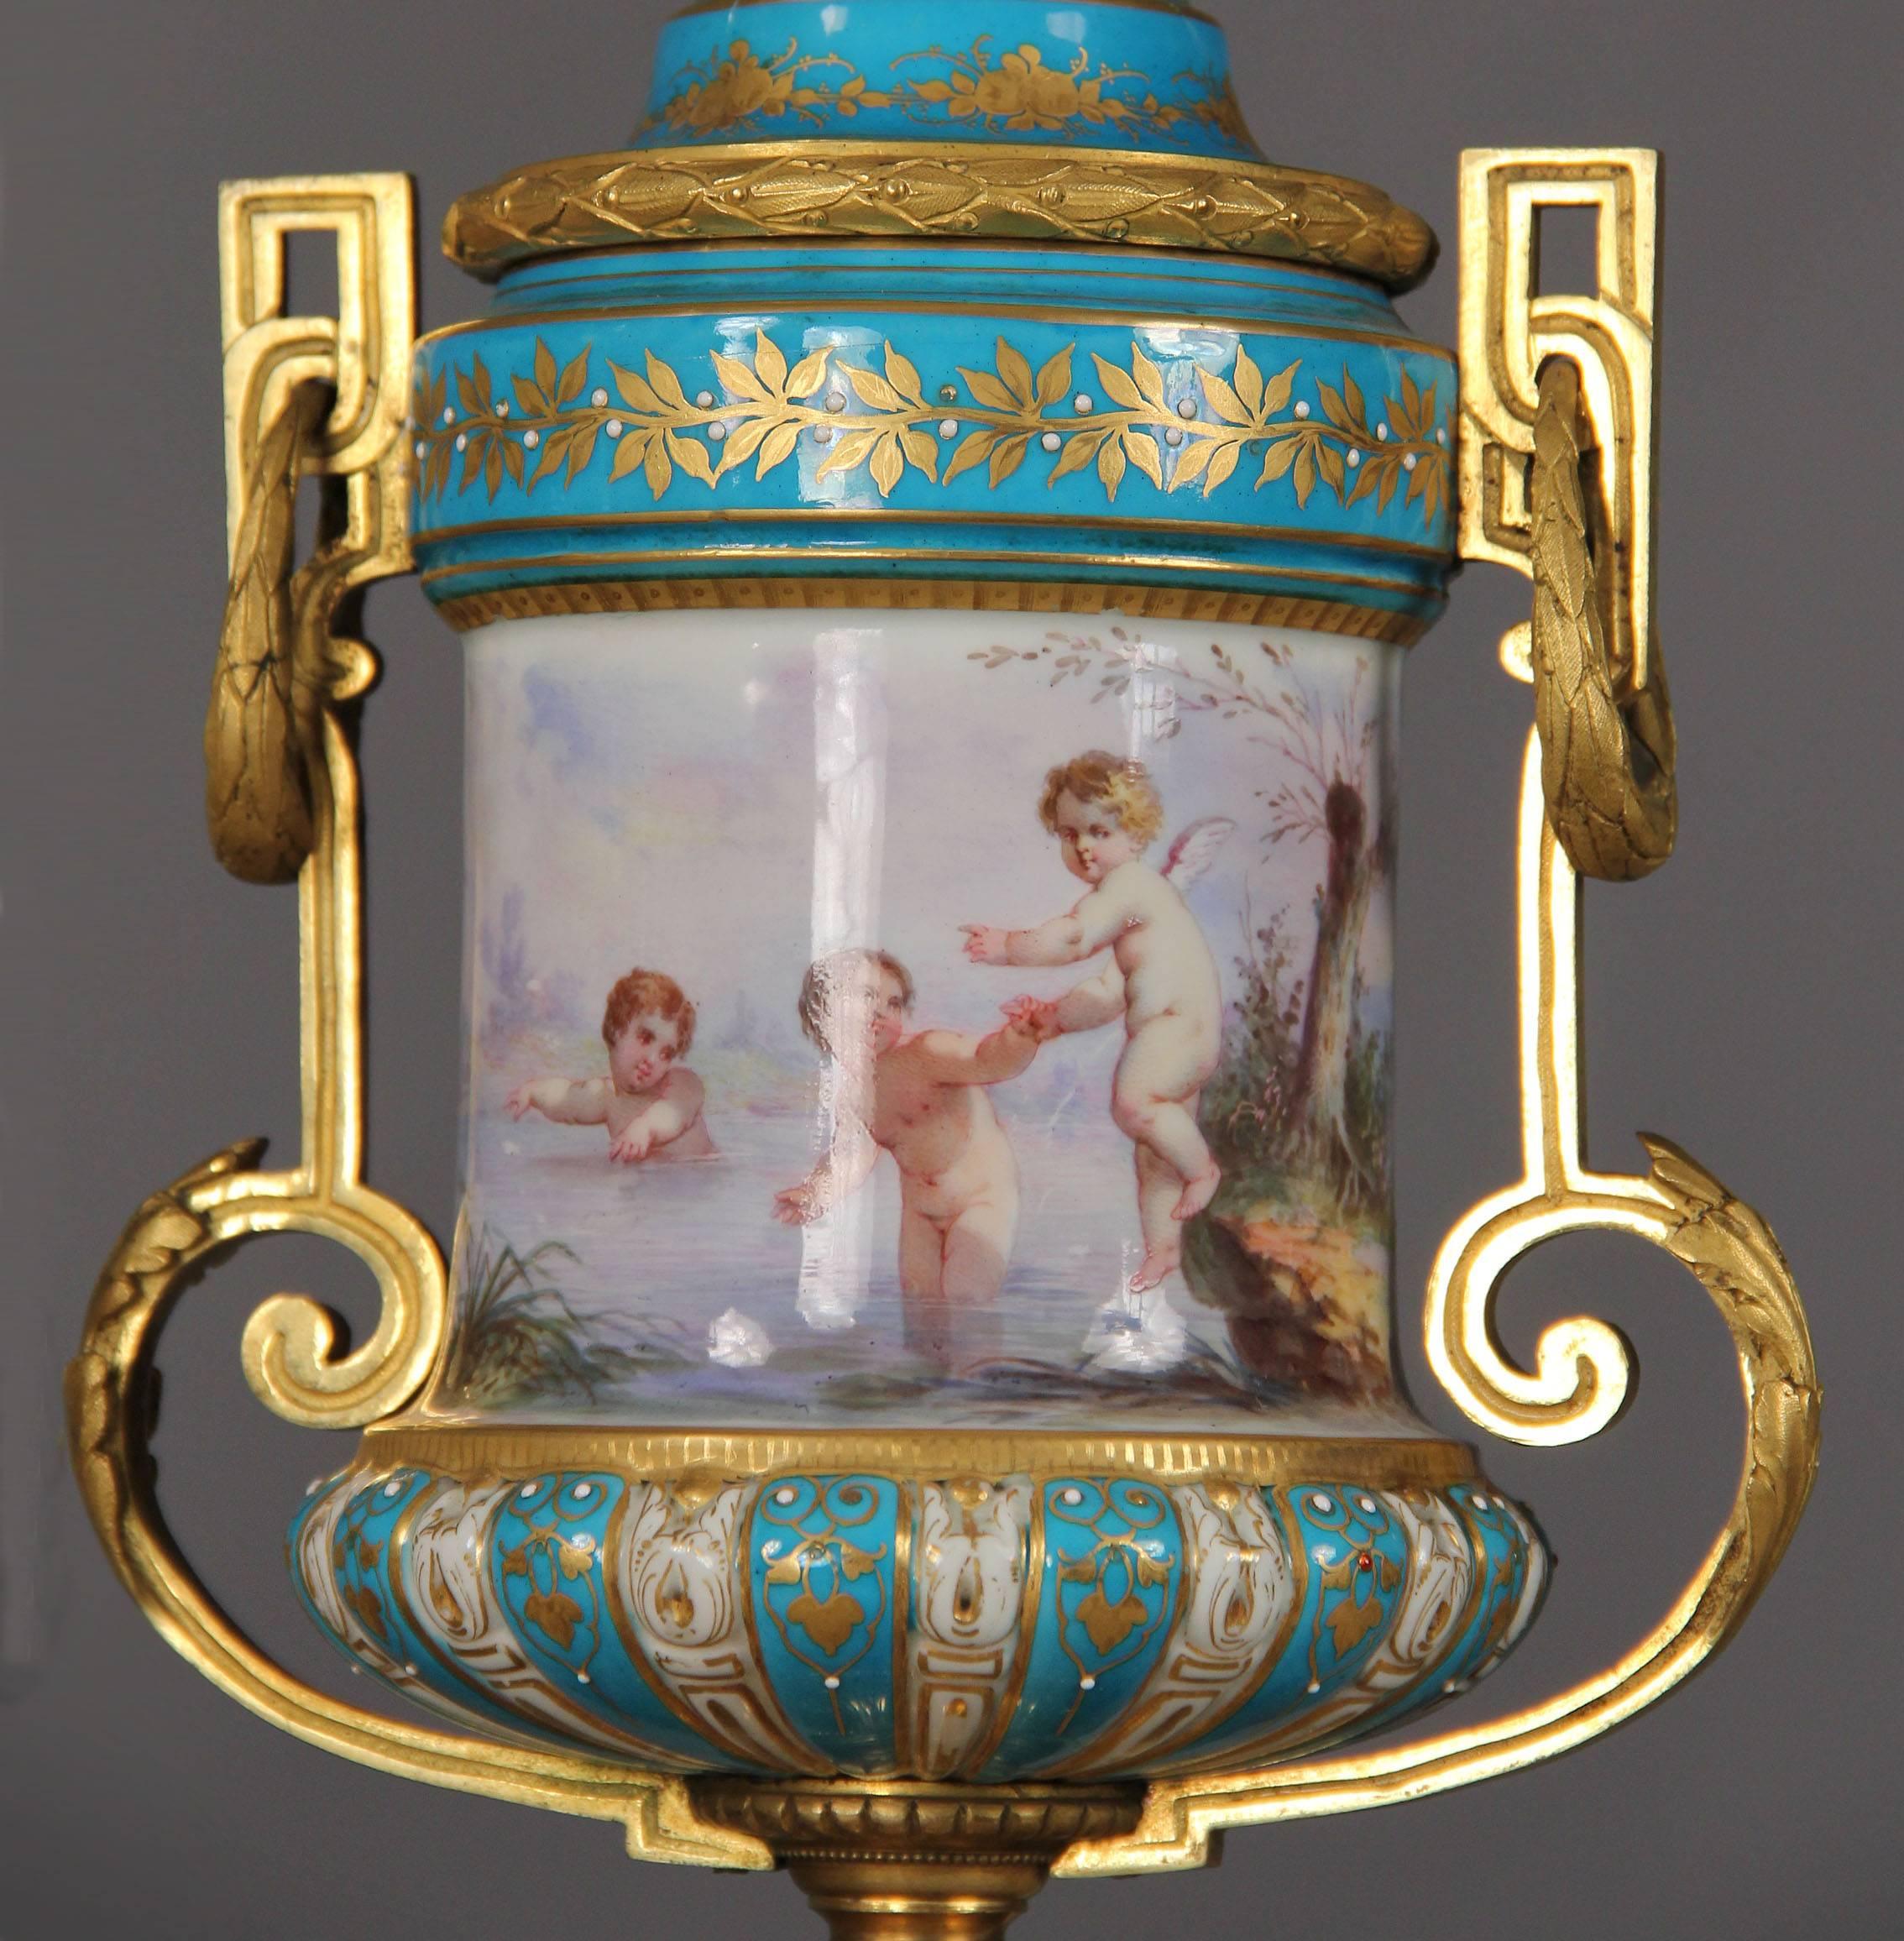 Late 19th Century Gilt Bronze and Turquoise Sèvres Porcelain 'Jeweled' Clock Set For Sale 1